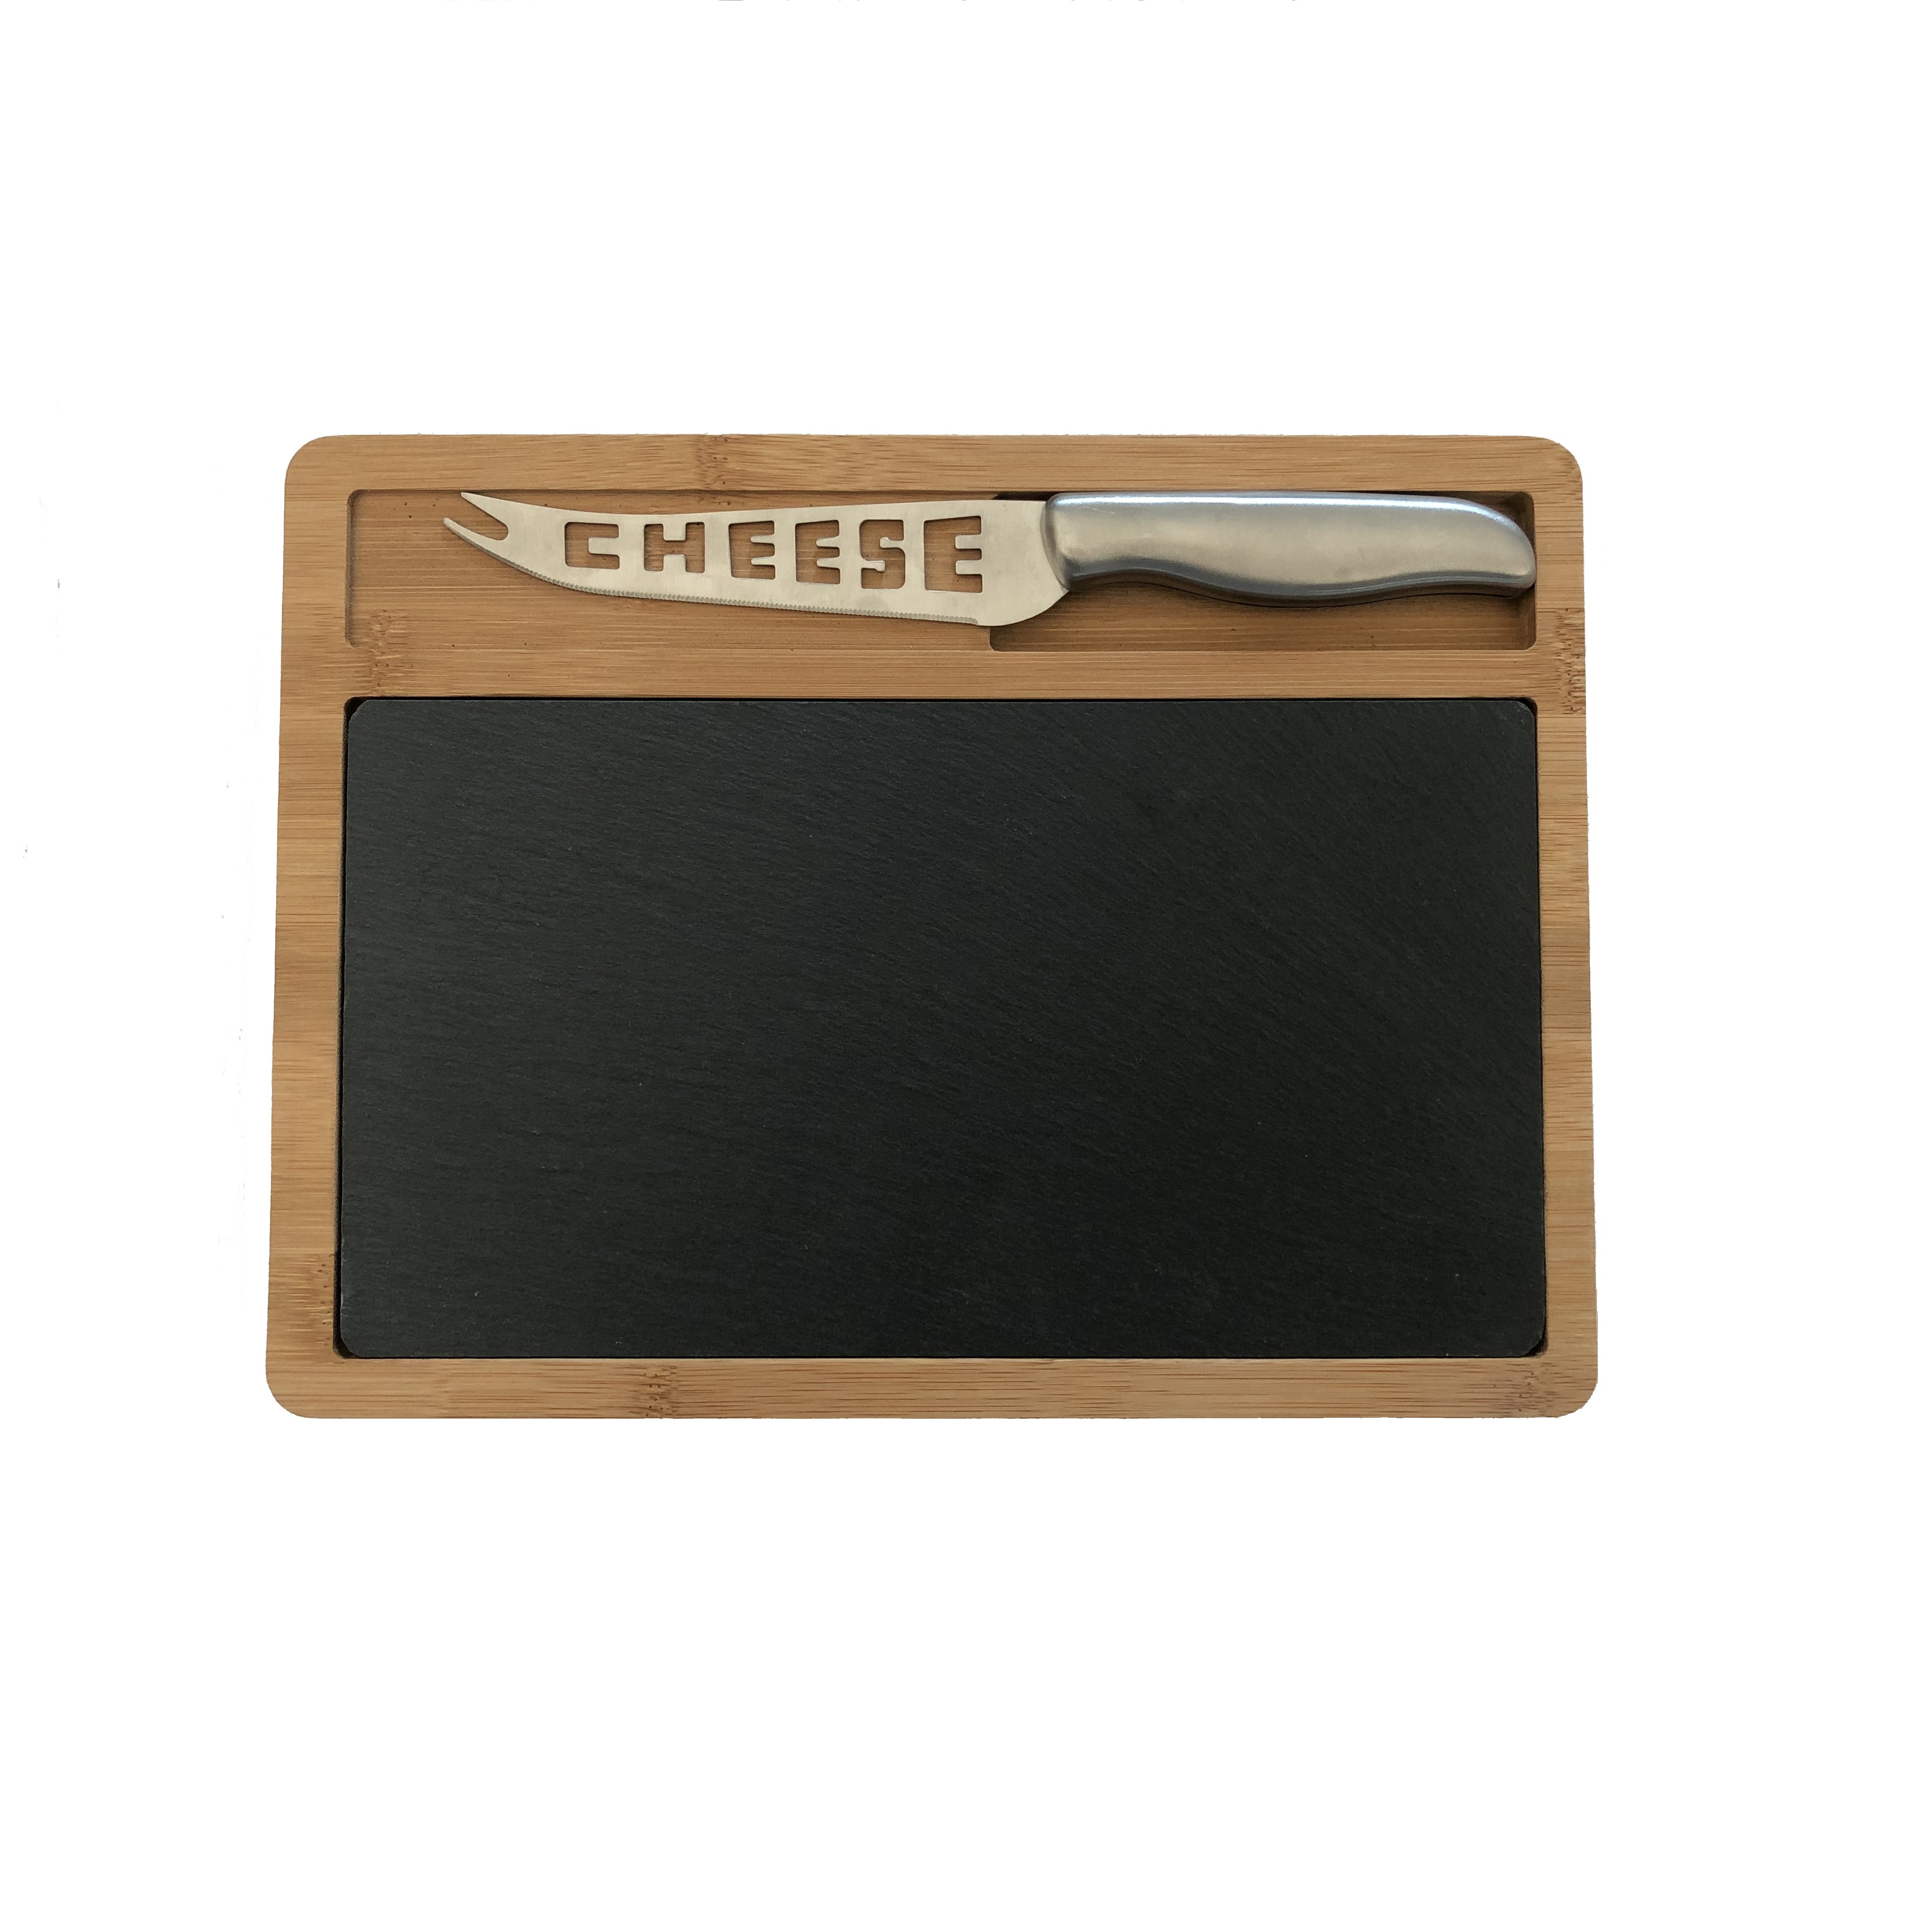 Wooden Bamboo and Slate Practical Restaurant Serving Cheese Board with Cutlery Set Featured Image